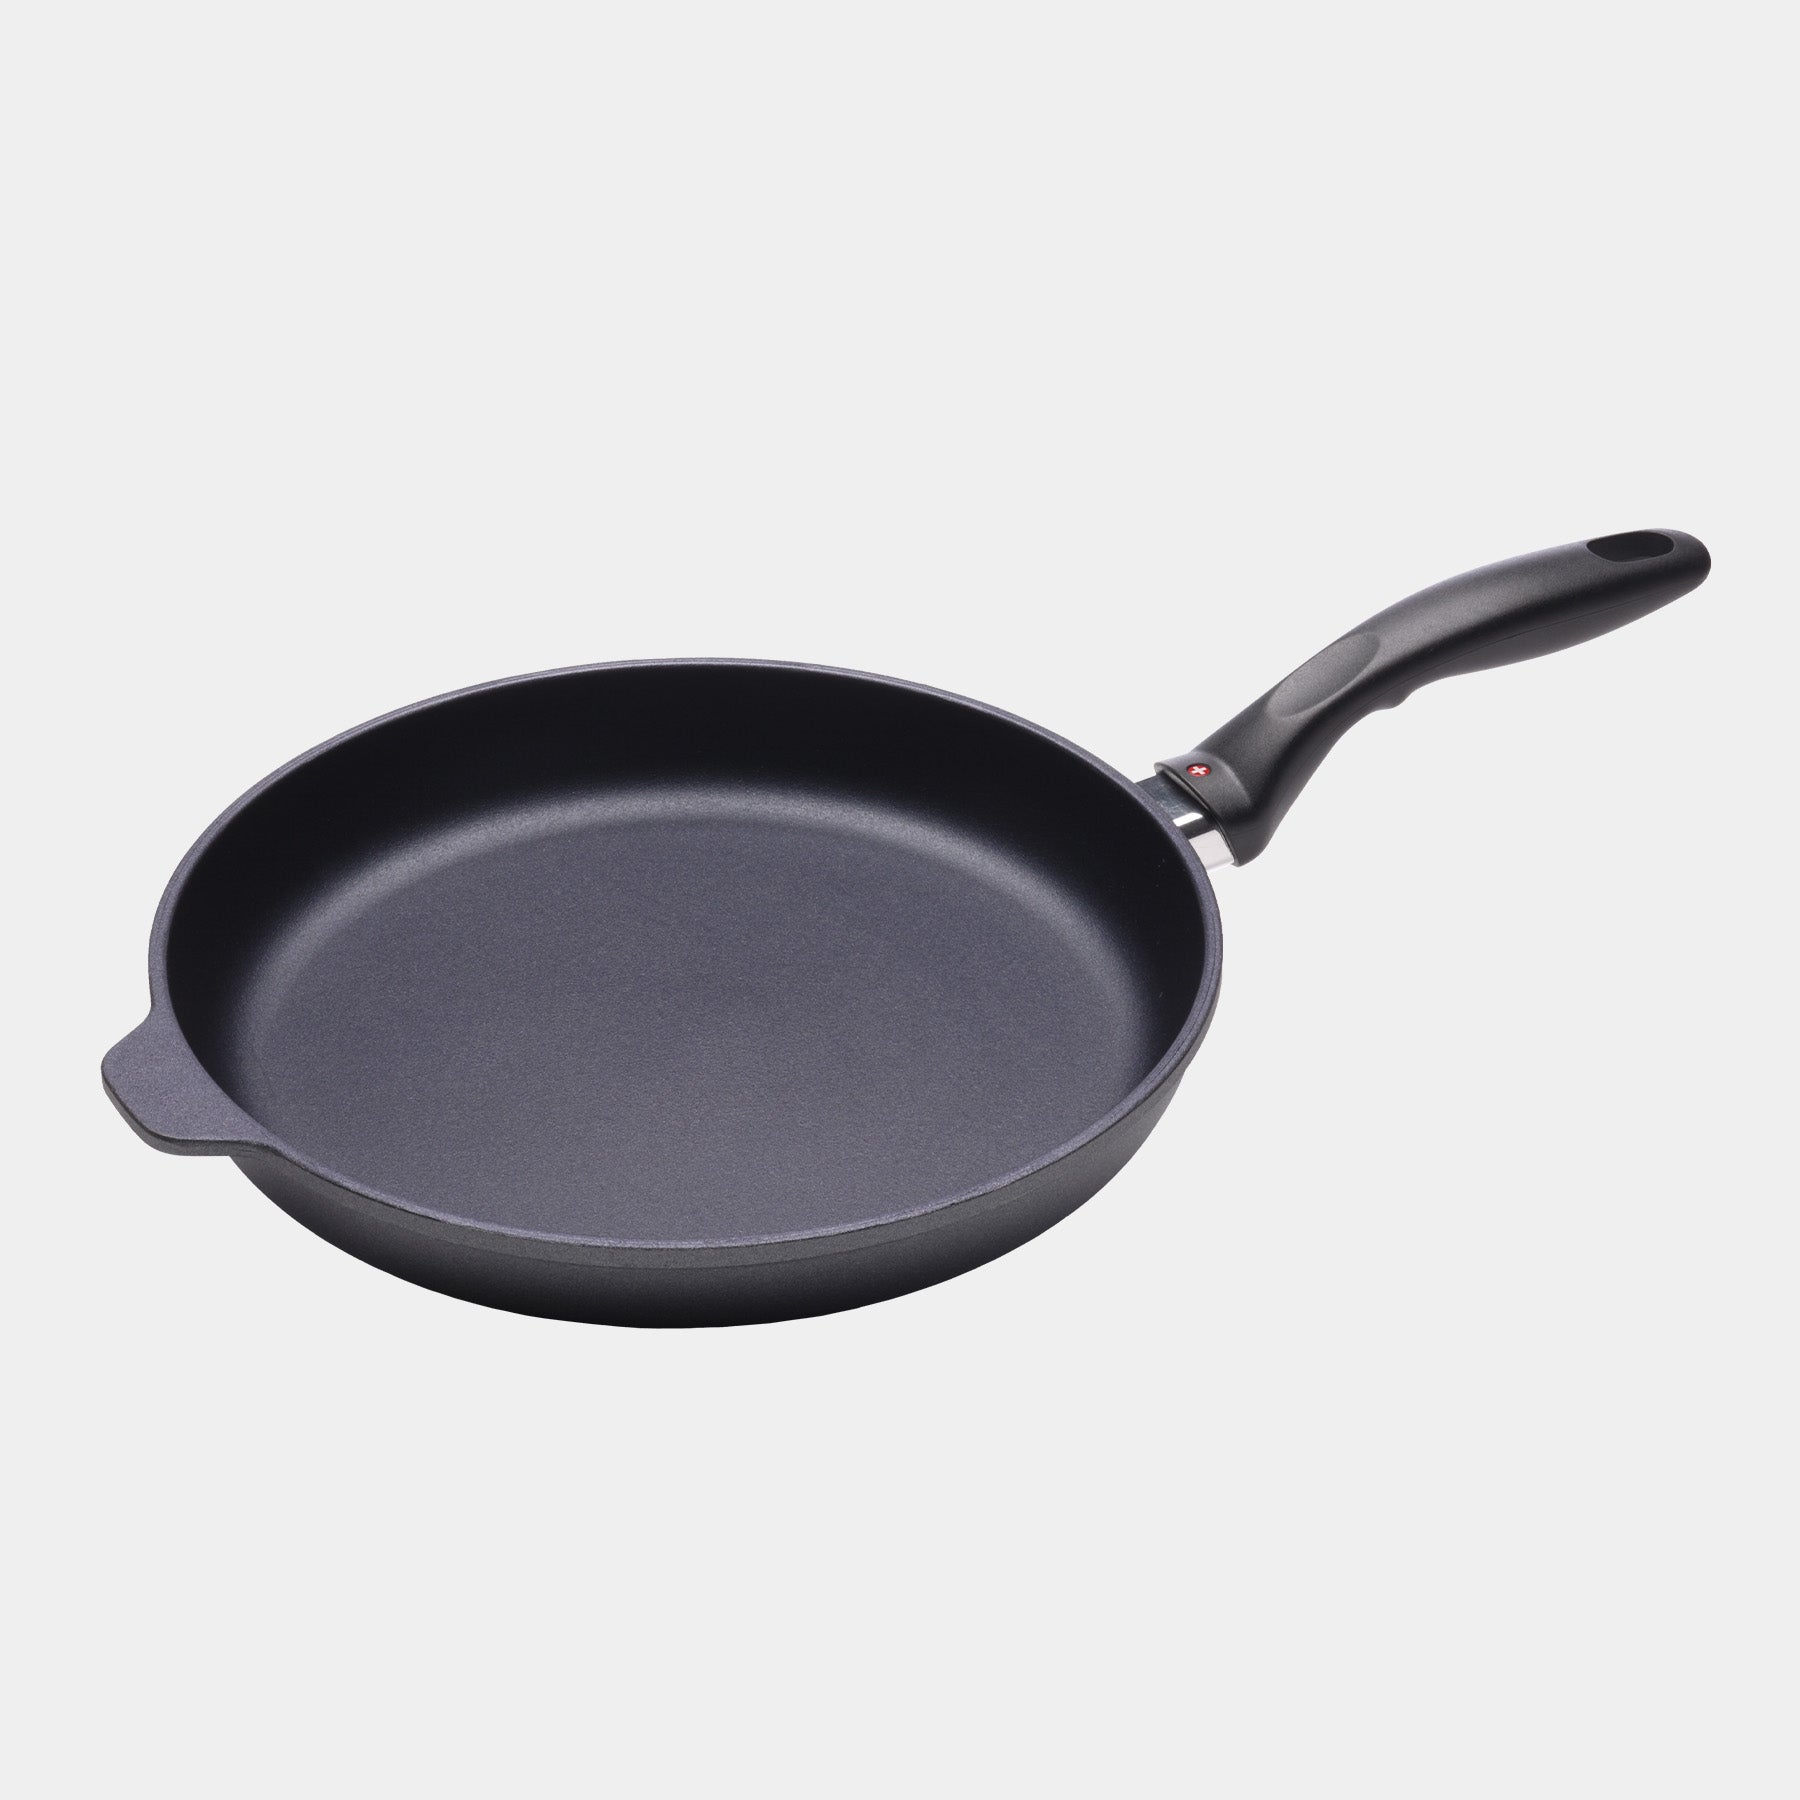 HD Nonstick 11" Fry Pan - Induction